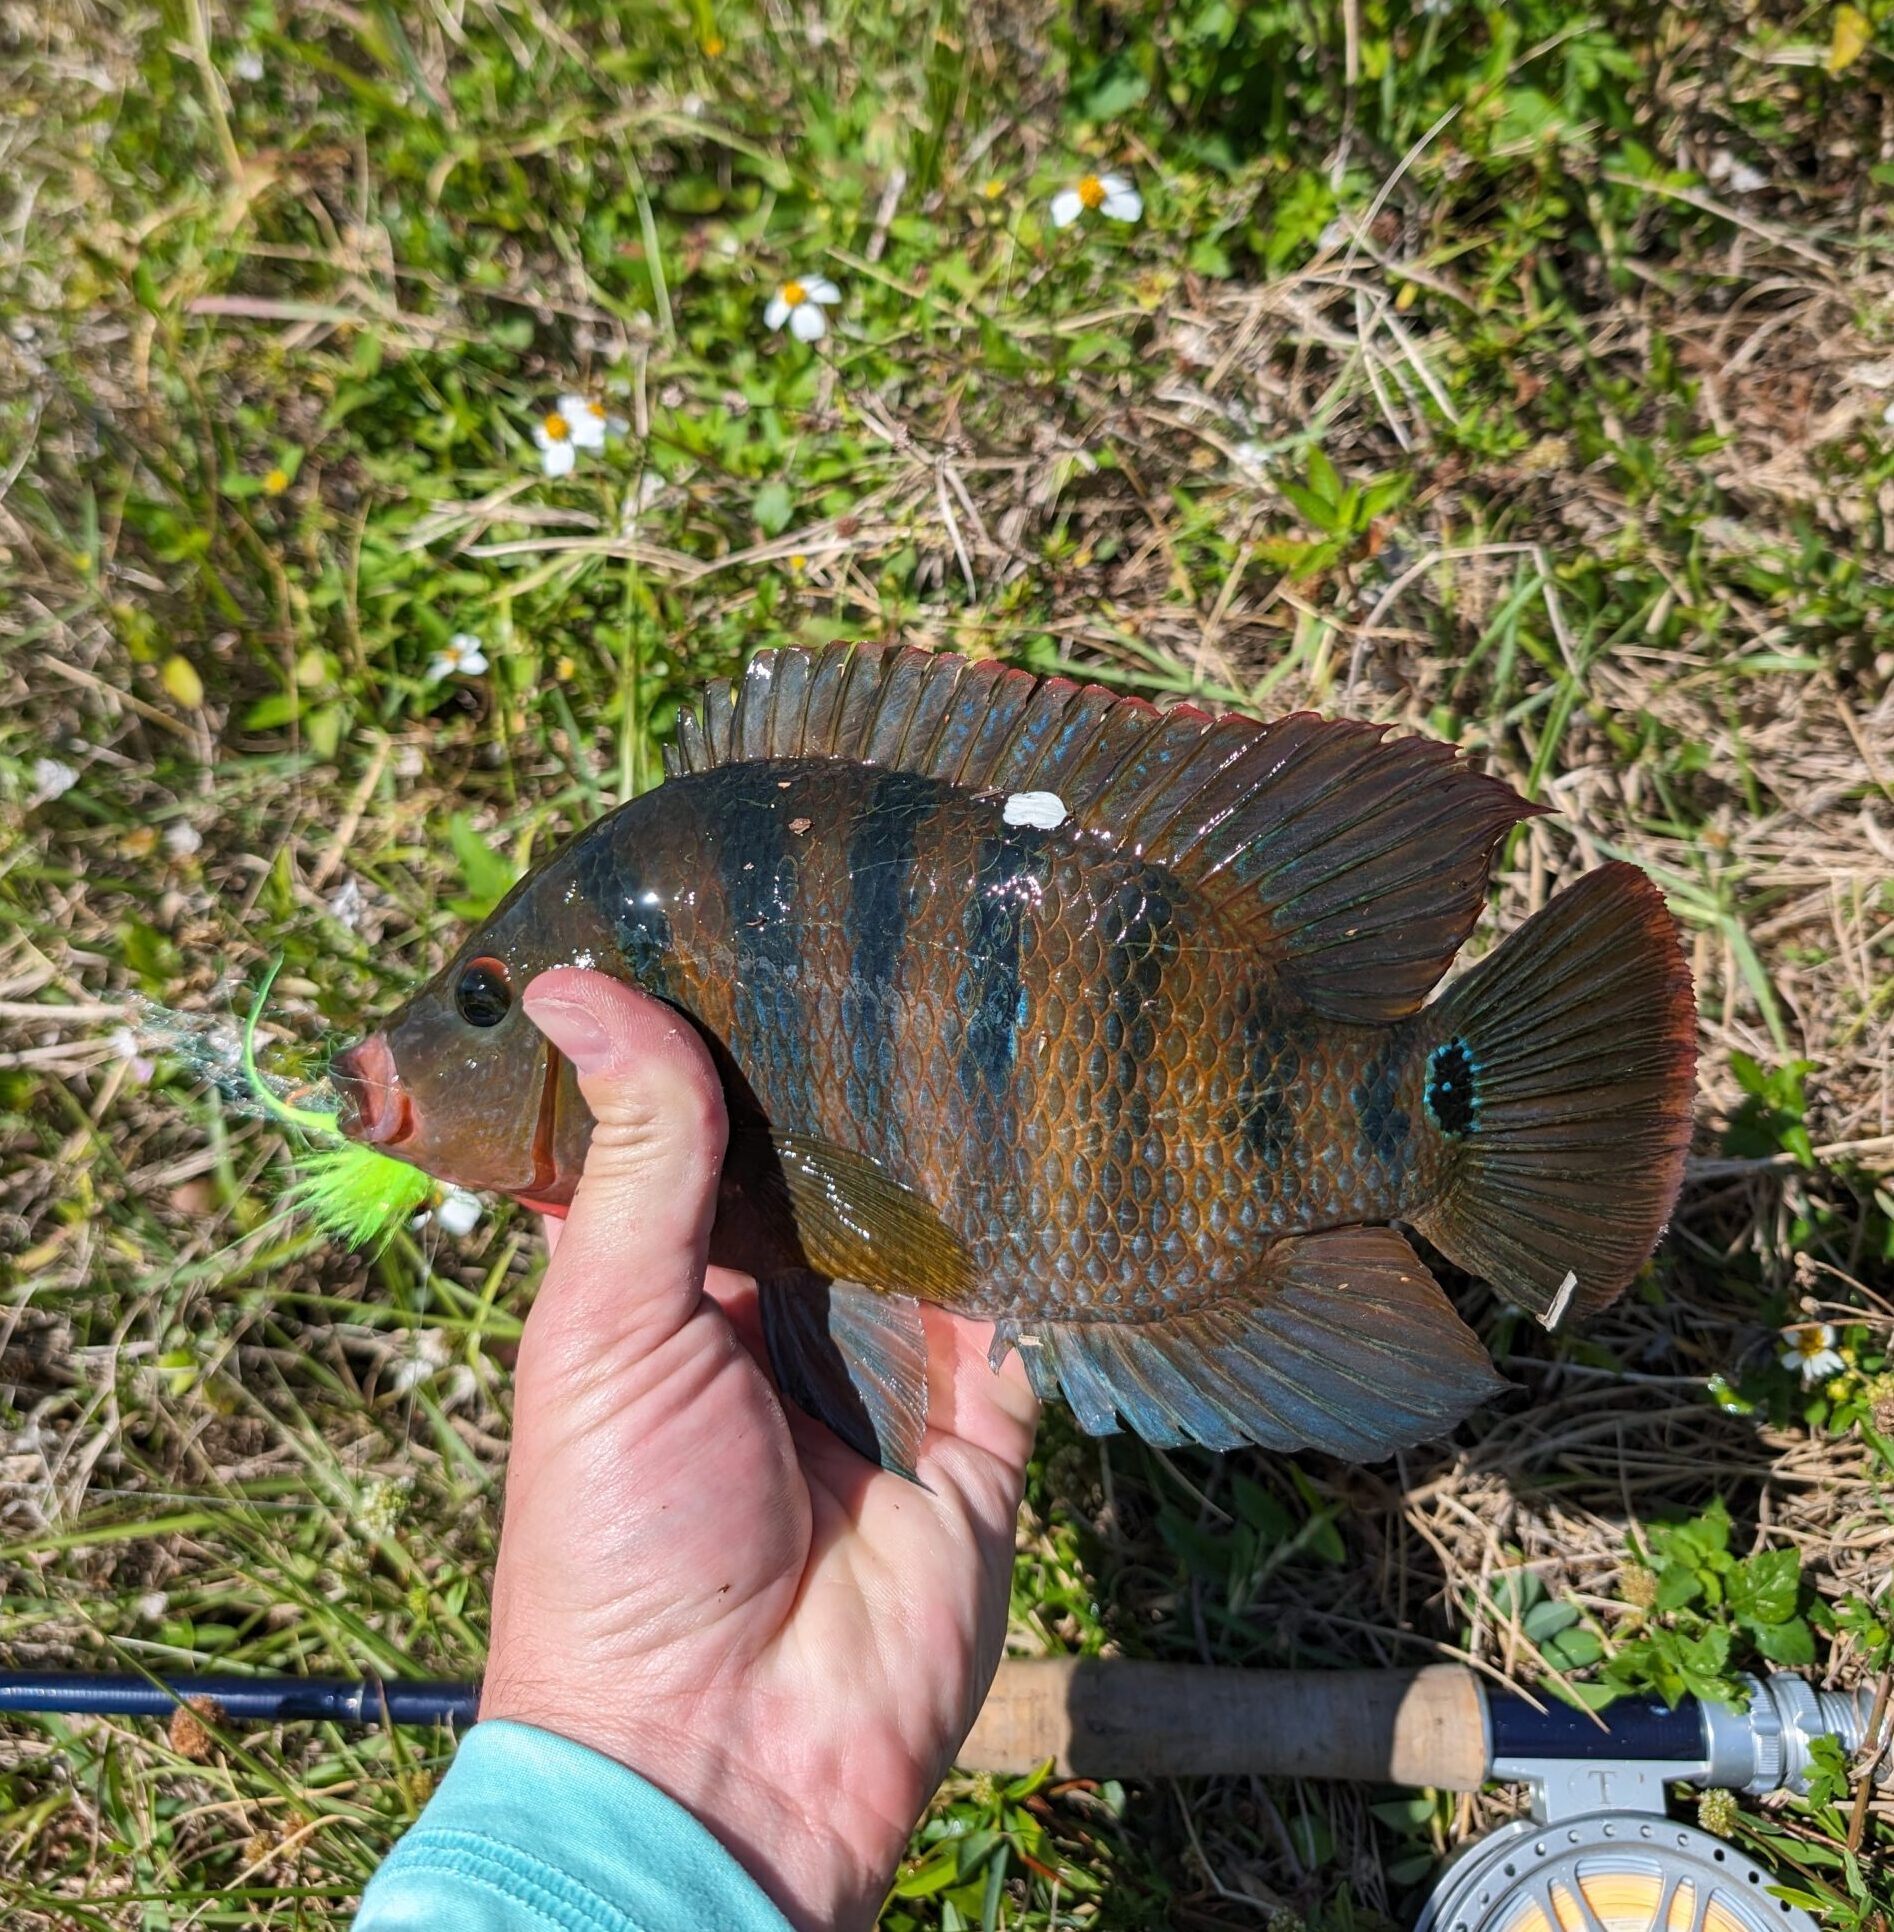 Mayan cichlid caught out of freshwater canals 